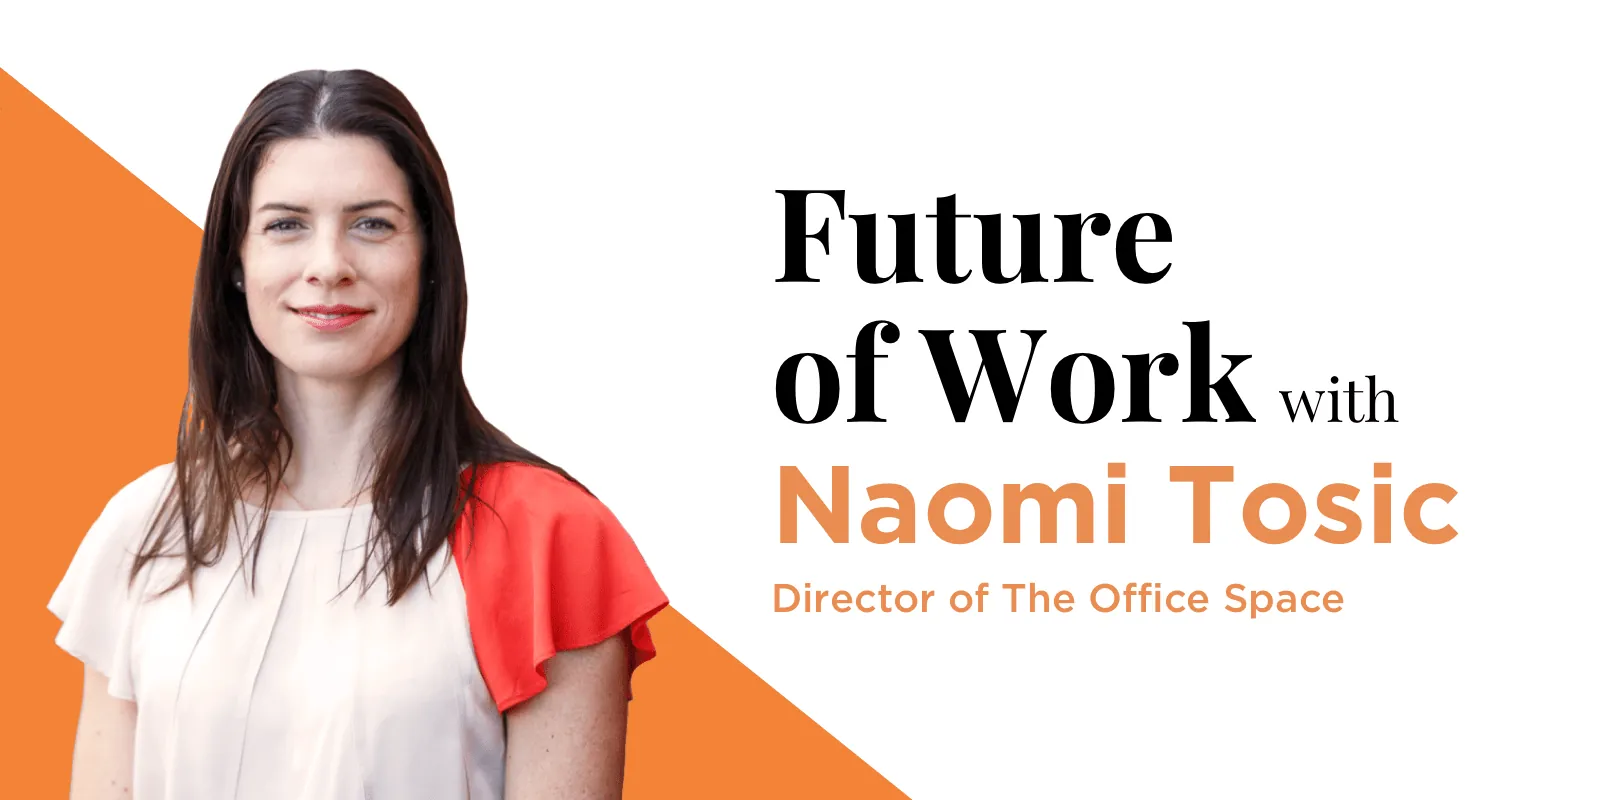 Future of work with Naomi Tosic